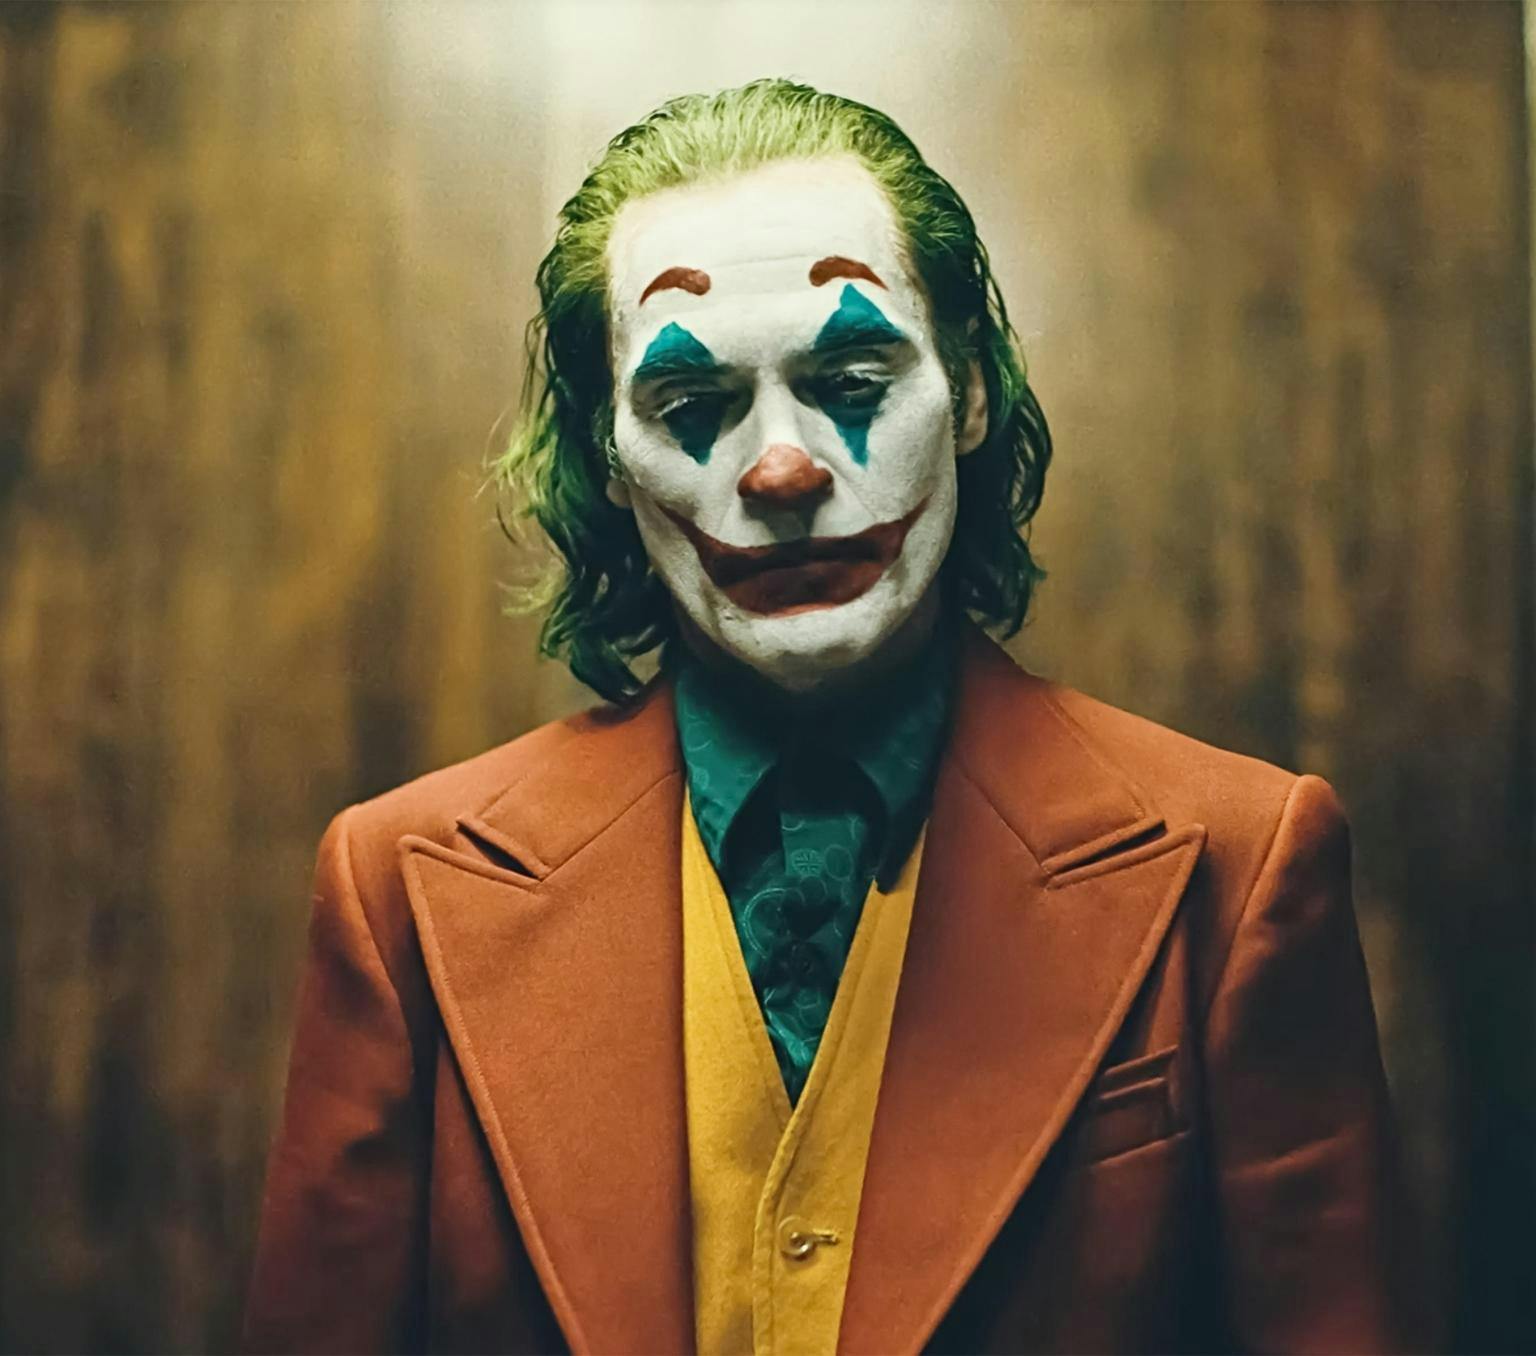 Joaquin Phoenix as the Joker, with his face painted in clown make up including a big red smile that extends onto his cheeks, stands in an orange suit, yellow vest and green shirt and looks downcast.